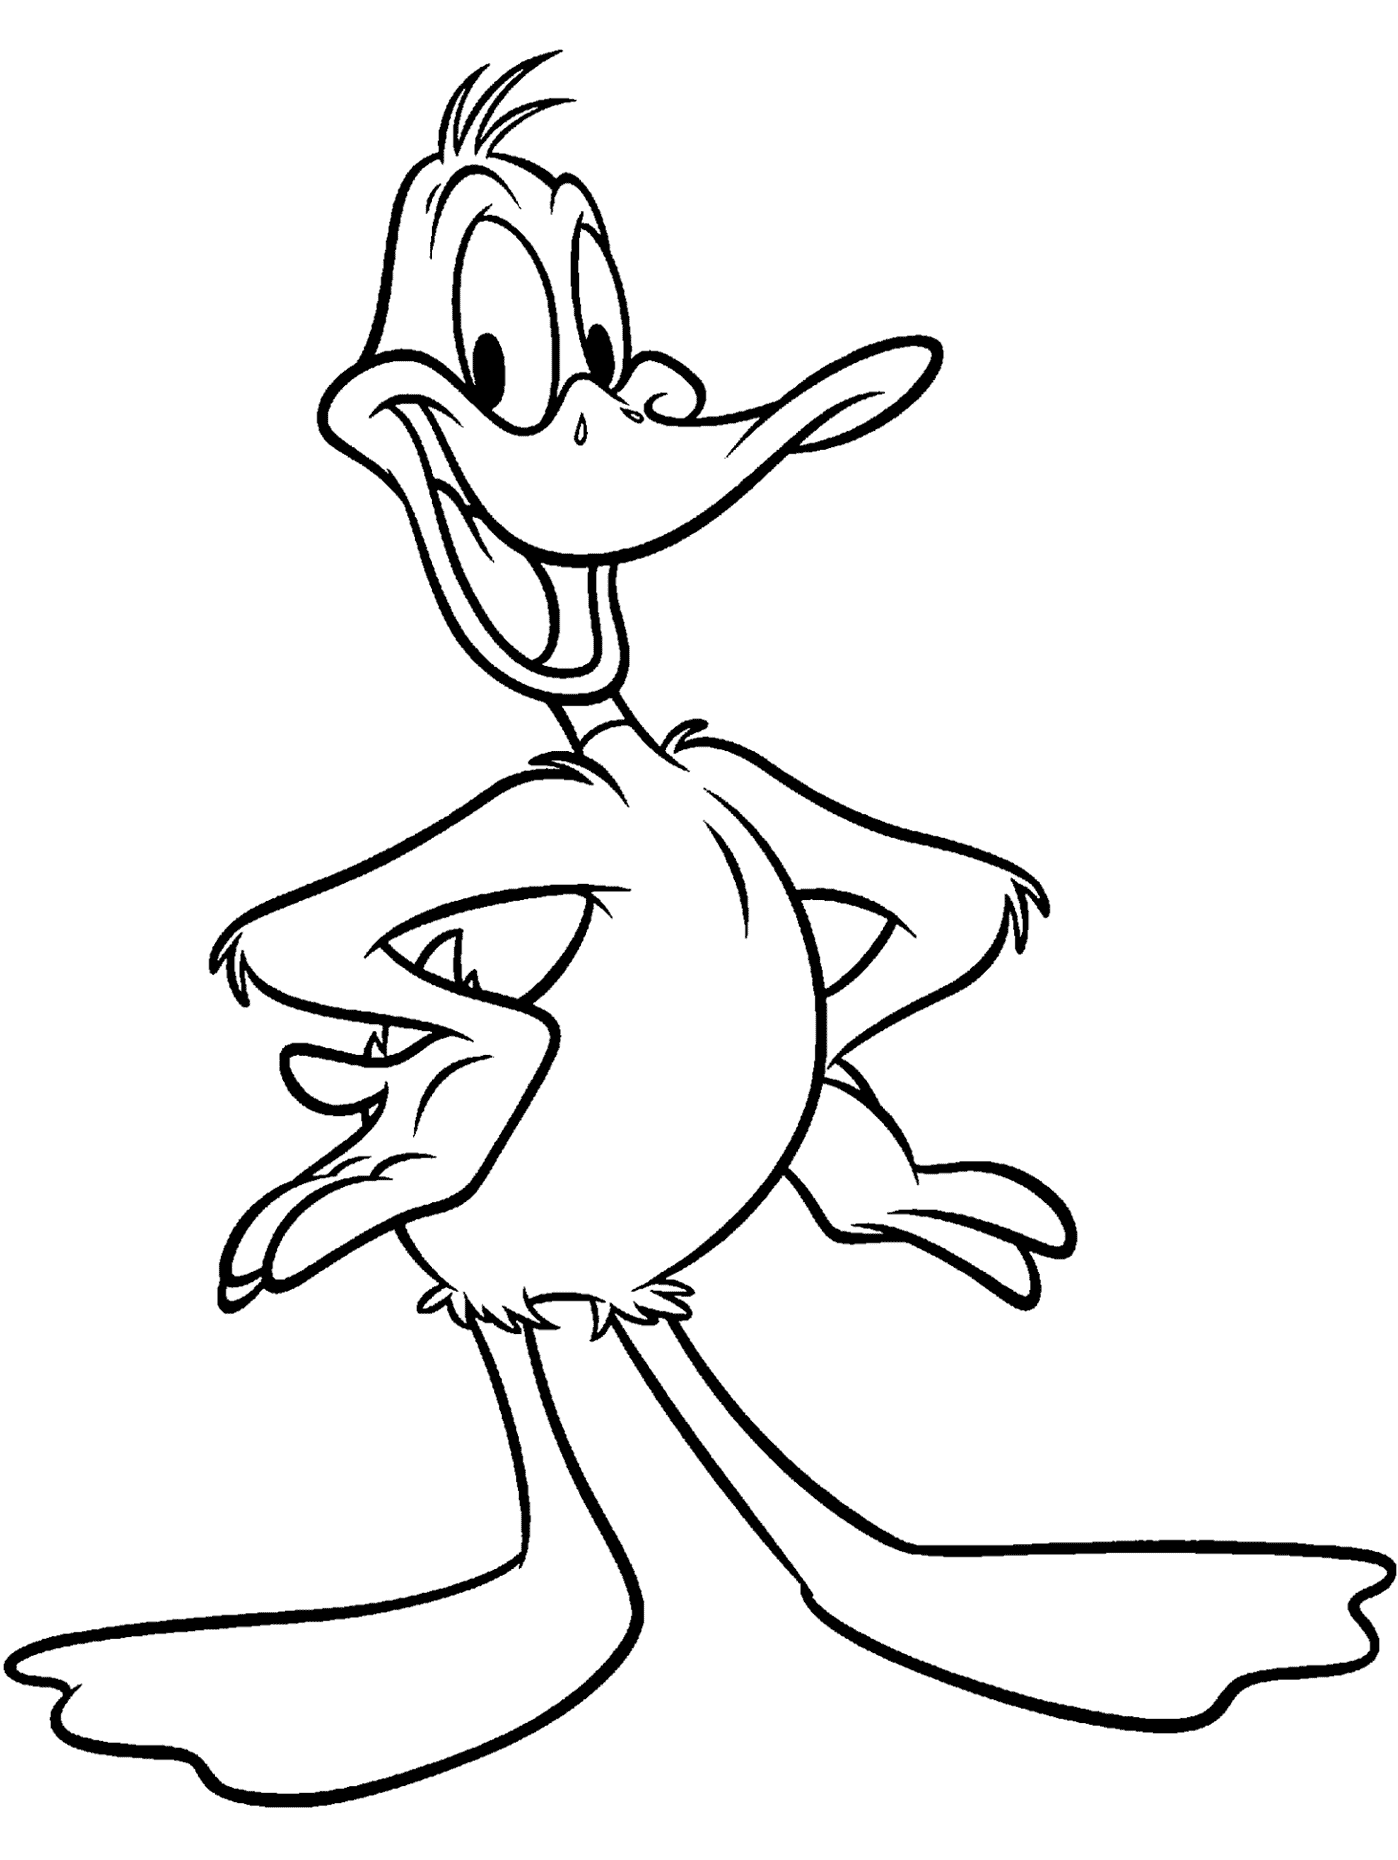 Daffy Duck Coloring Page For Kids Wallpaper   Clipart Best   Clipart